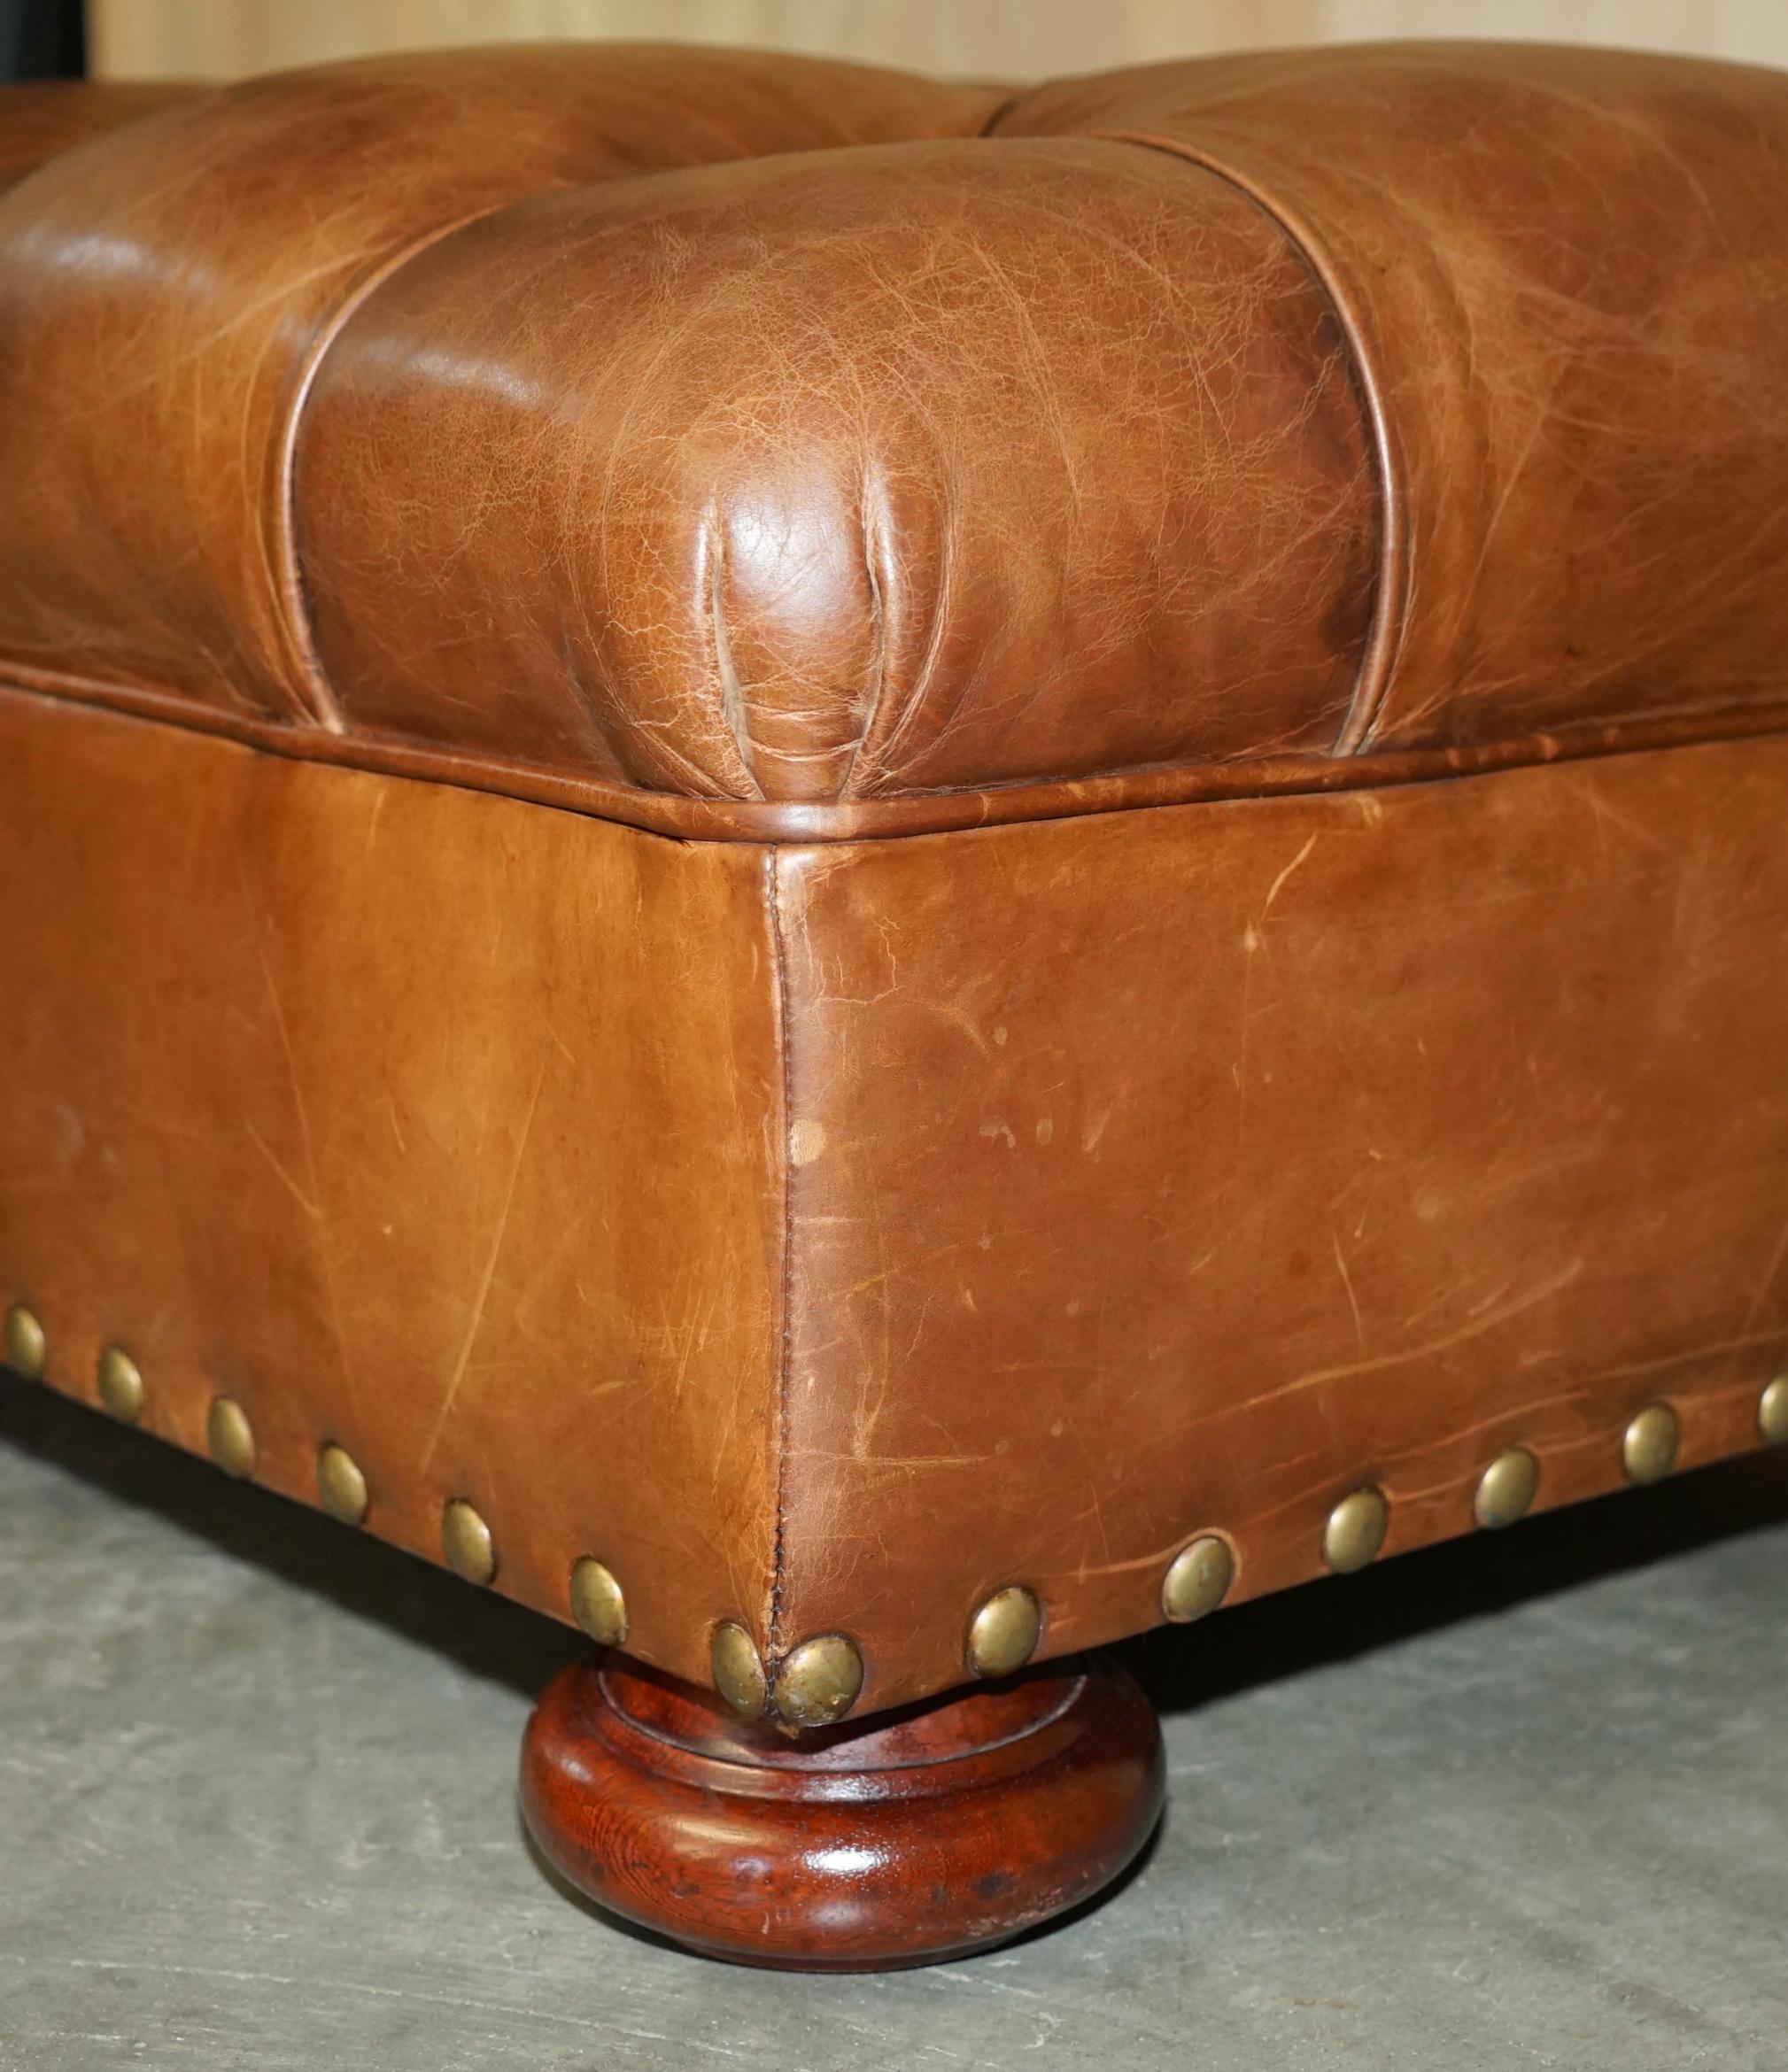 RALPH LAUREN WRITER'S CHESTERFIELD FOOTSTOOL OTTOMAN IN HERiTAGE BROWN LEATHER 2